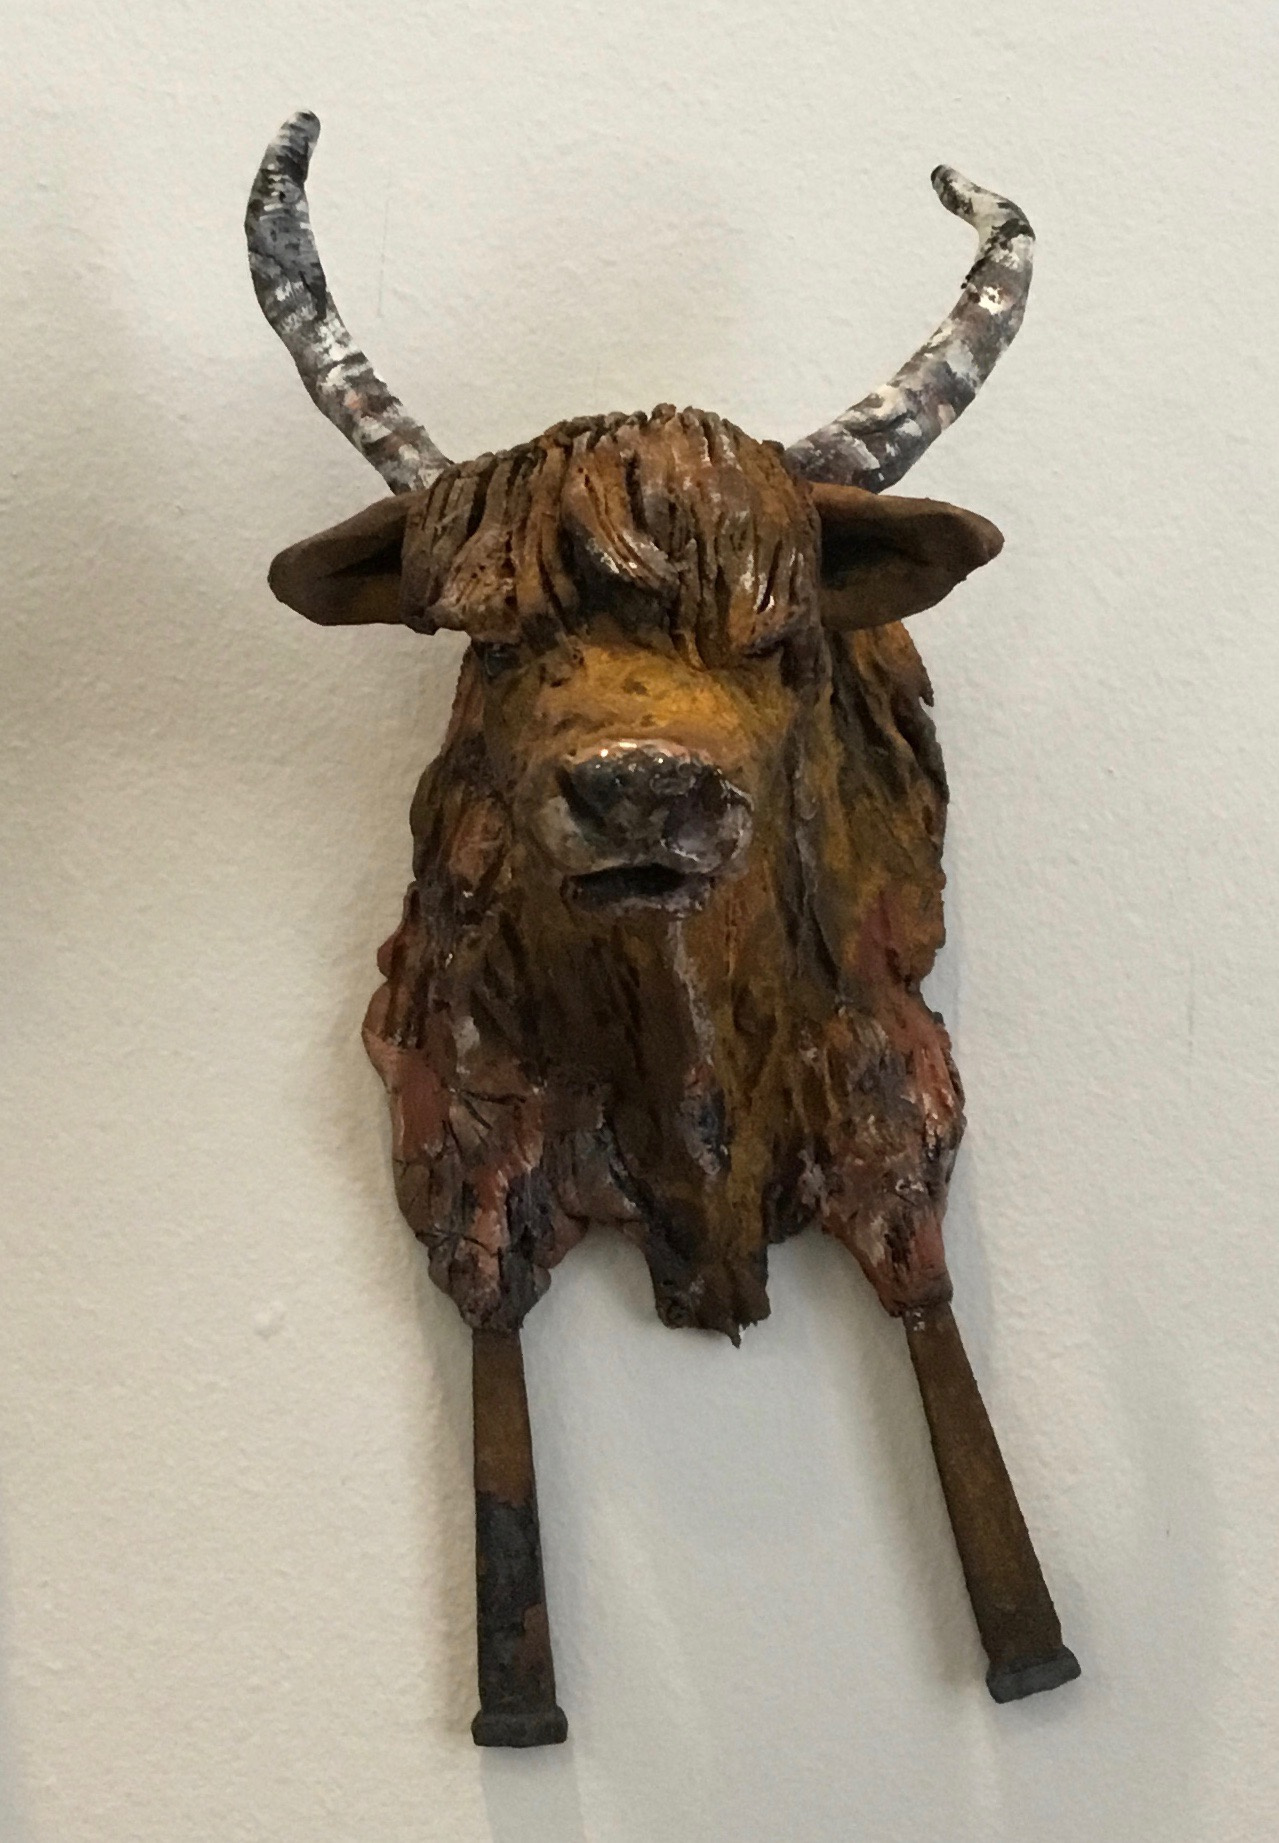 Brown Horned Cow
Ceramic
7.5"
$110.